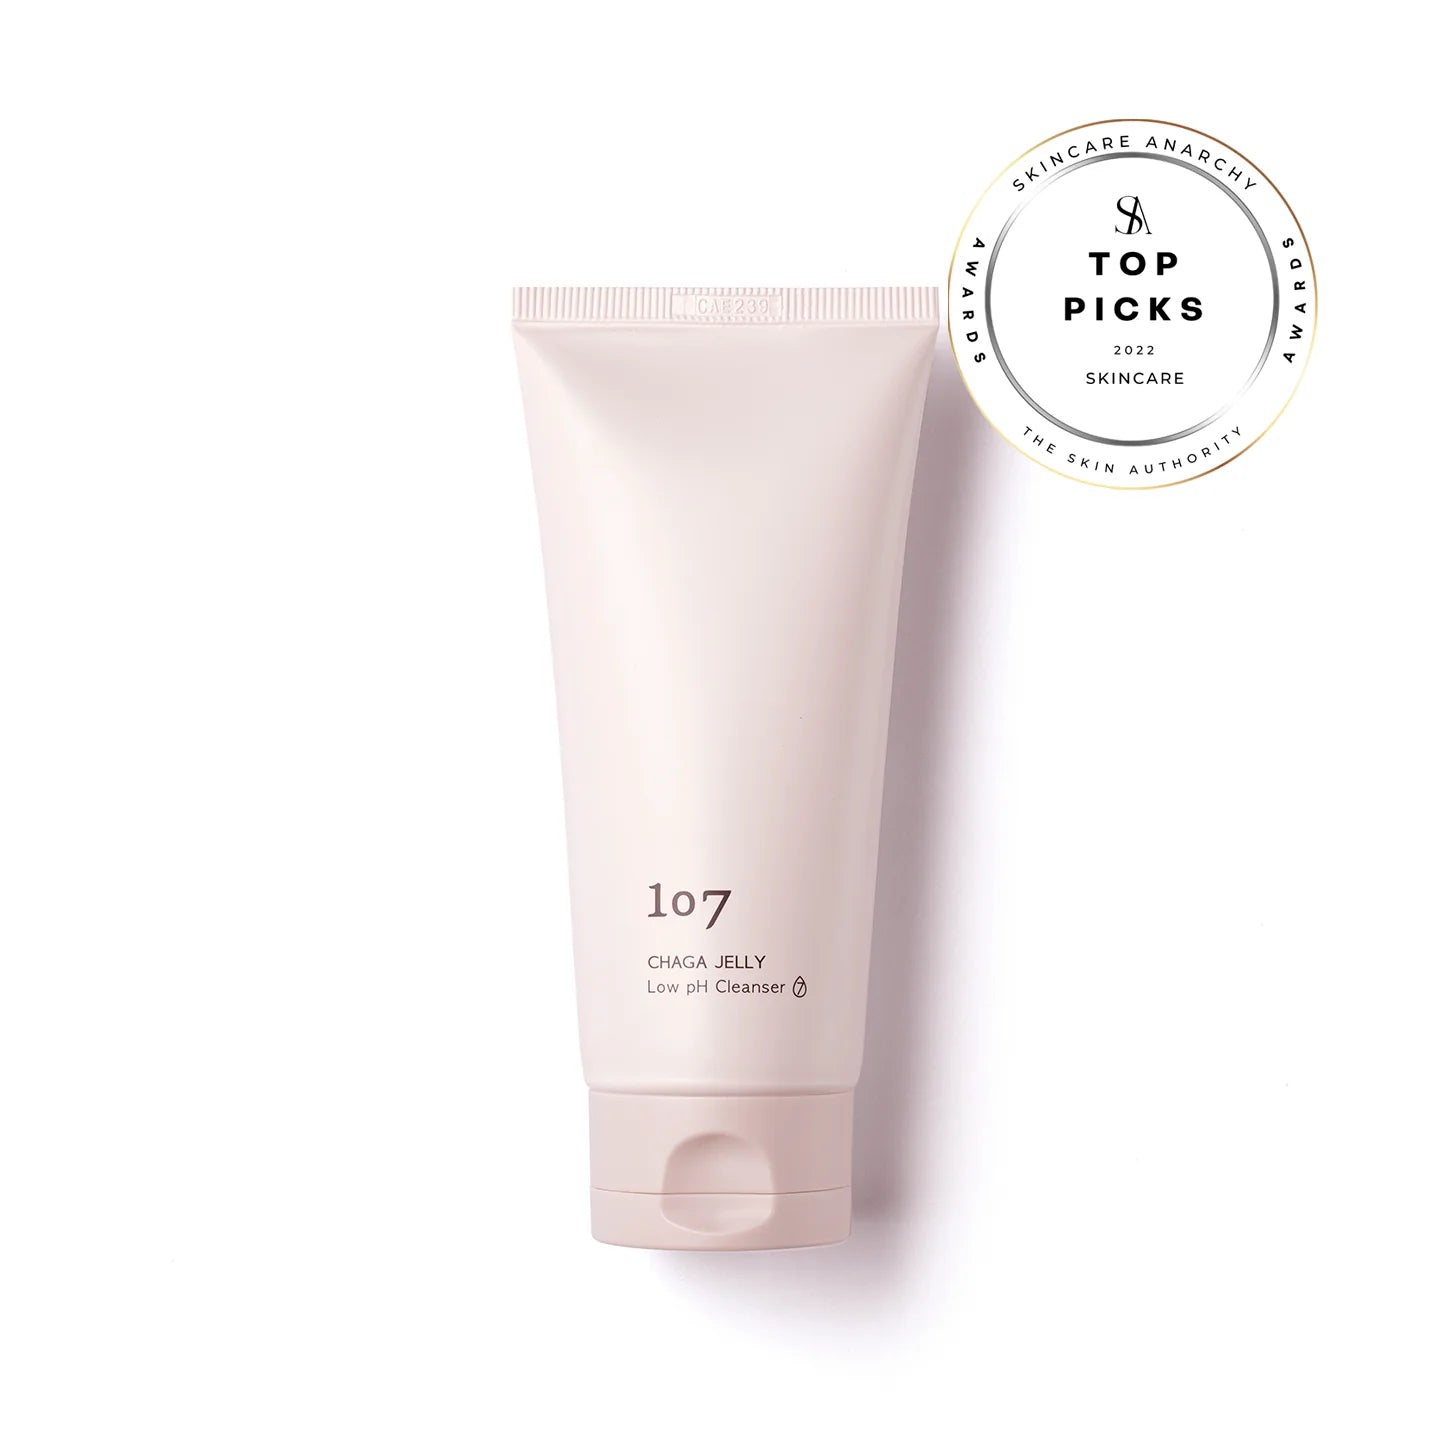 107 CHAGA JELLY Low pH Cleanser